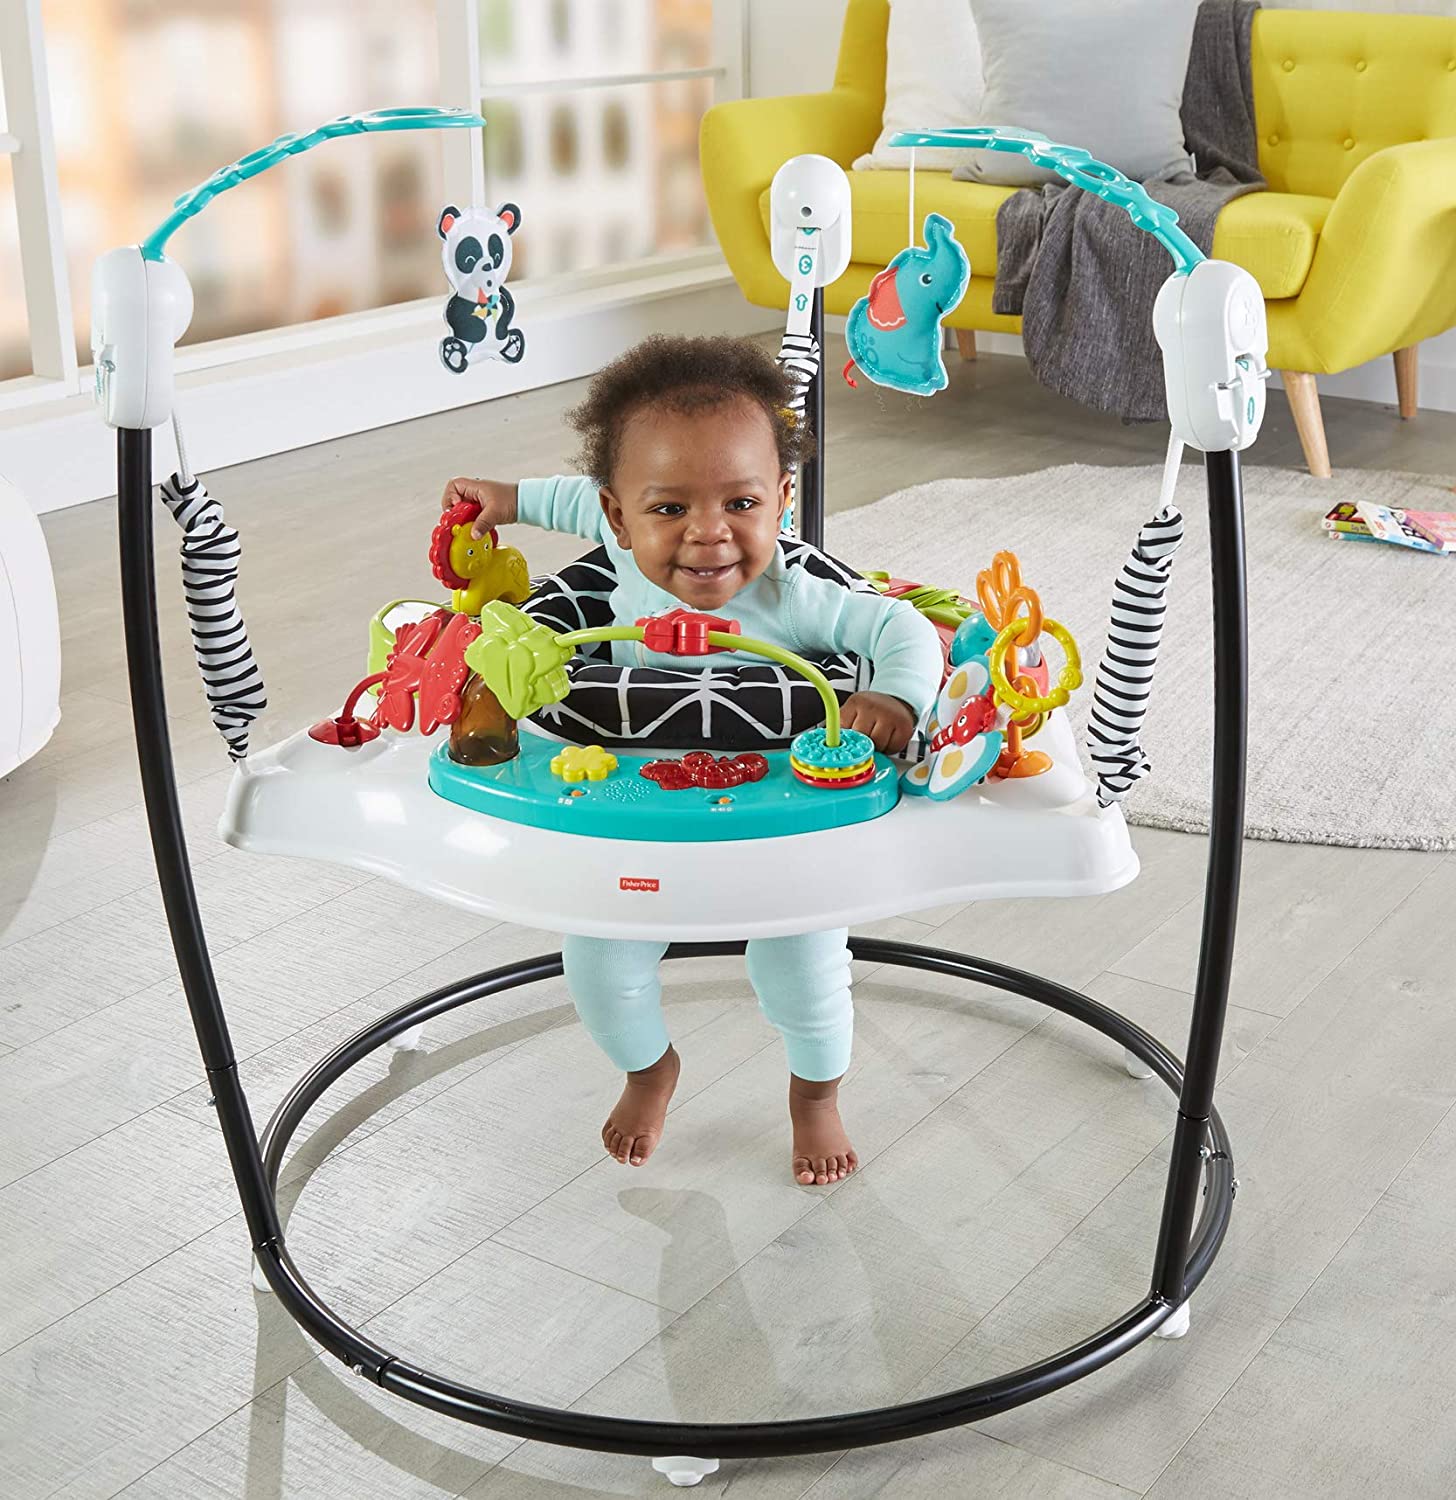 5 Activity Center Options that Grow with Your Baby